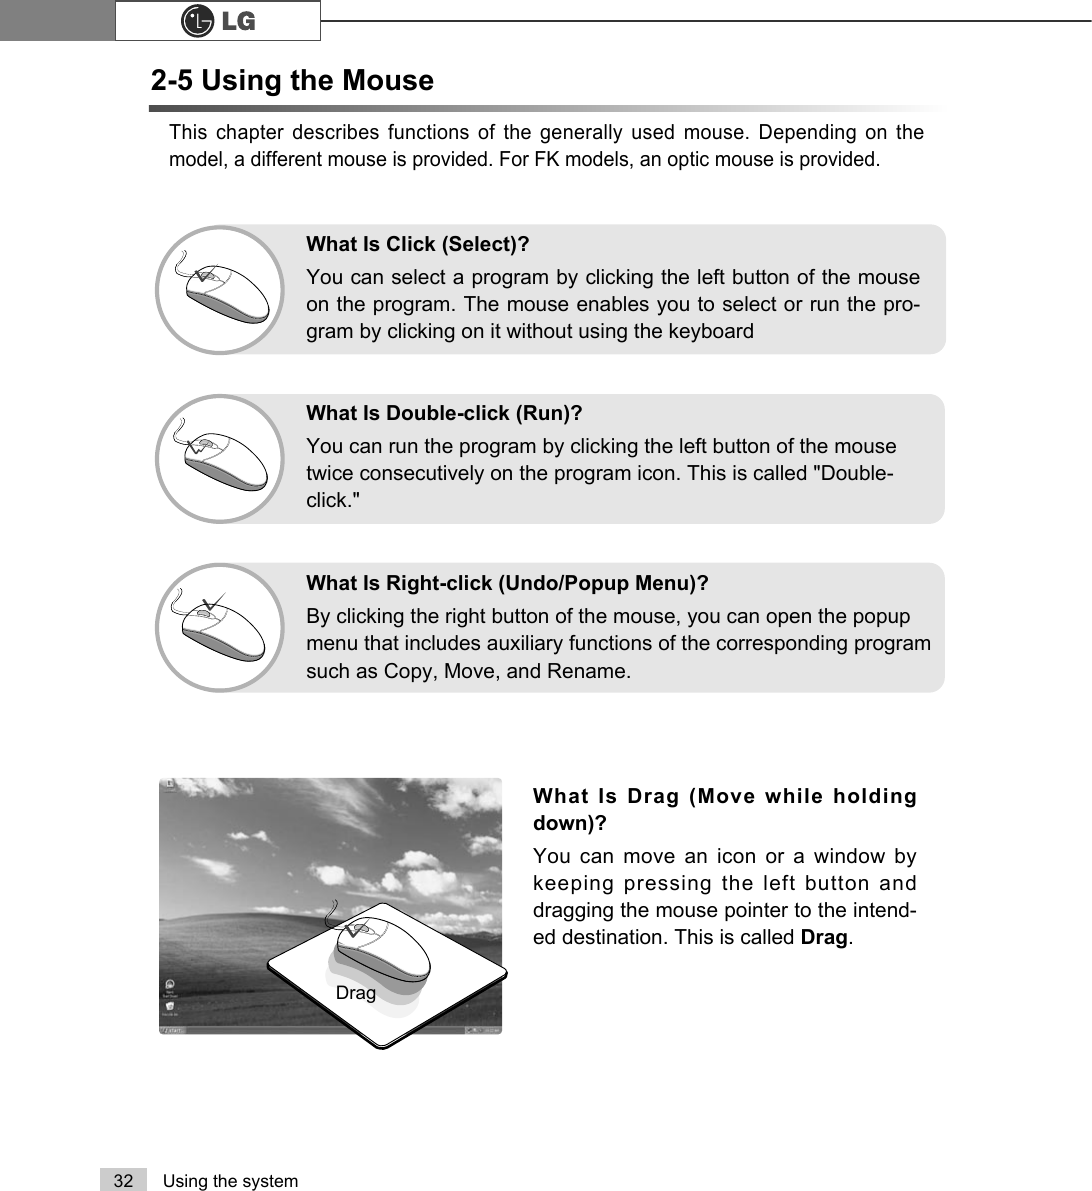 32 Using the systemThis chapter describes functions of the generally used mouse. Depending on themodel, a different mouse is provided. For FK models, an optic mouse is provided.What Is Drag (Move while holdingdown)? You can move an icon or a window bykeeping pressing the left button anddragging the mouse pointer to the intend-ed destination. This is called Drag. DragWhat Is Double-click (Run)?You can run the program by clicking the left button of the mousetwice consecutively on the program icon. This is called &quot;Double-click.&quot; What Is Right-click (Undo/Popup Menu)?By clicking the right button of the mouse, you can open the popupmenu that includes auxiliary functions of the corresponding programsuch as Copy, Move, and Rename.What Is Click (Select)?You can select a program by clicking the left button of the mouseon the program. The mouse enables you to select or run the pro-gram by clicking on it without using the keyboard2-5 Using the Mouse